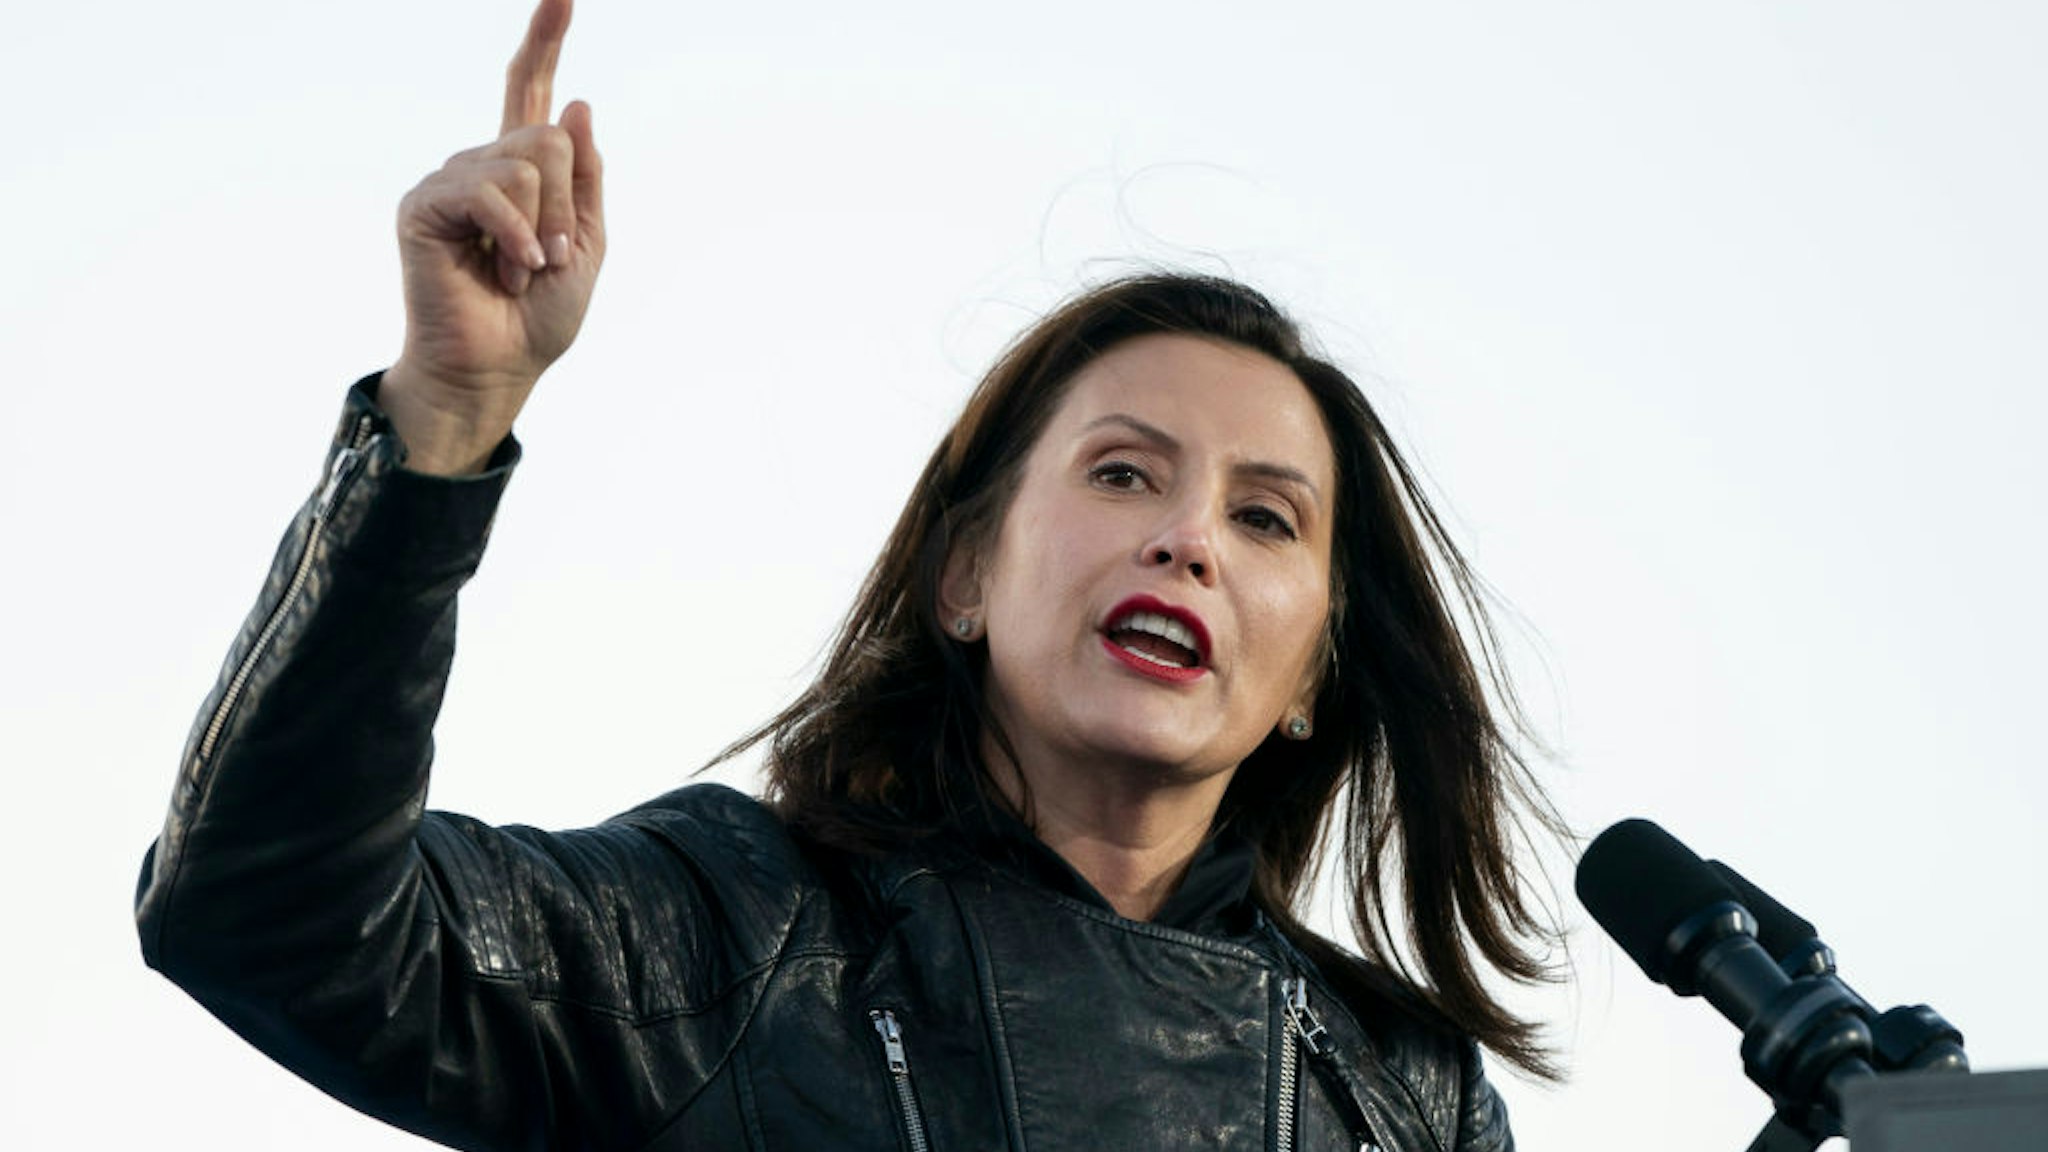 DETROIT, MI - OCTOBER 31: Gov. Gretchen Whitmer speaks during a drive-in campaign rally with Democratic presidential nominee Joe Biden and former President Barack Obama at Belle Isle on October 31, 2020 in Detroit, Michigan. Biden is campaigning with Obama on Saturday in Michigan, a battleground state that President Donald Trump narrowly won in 2016.